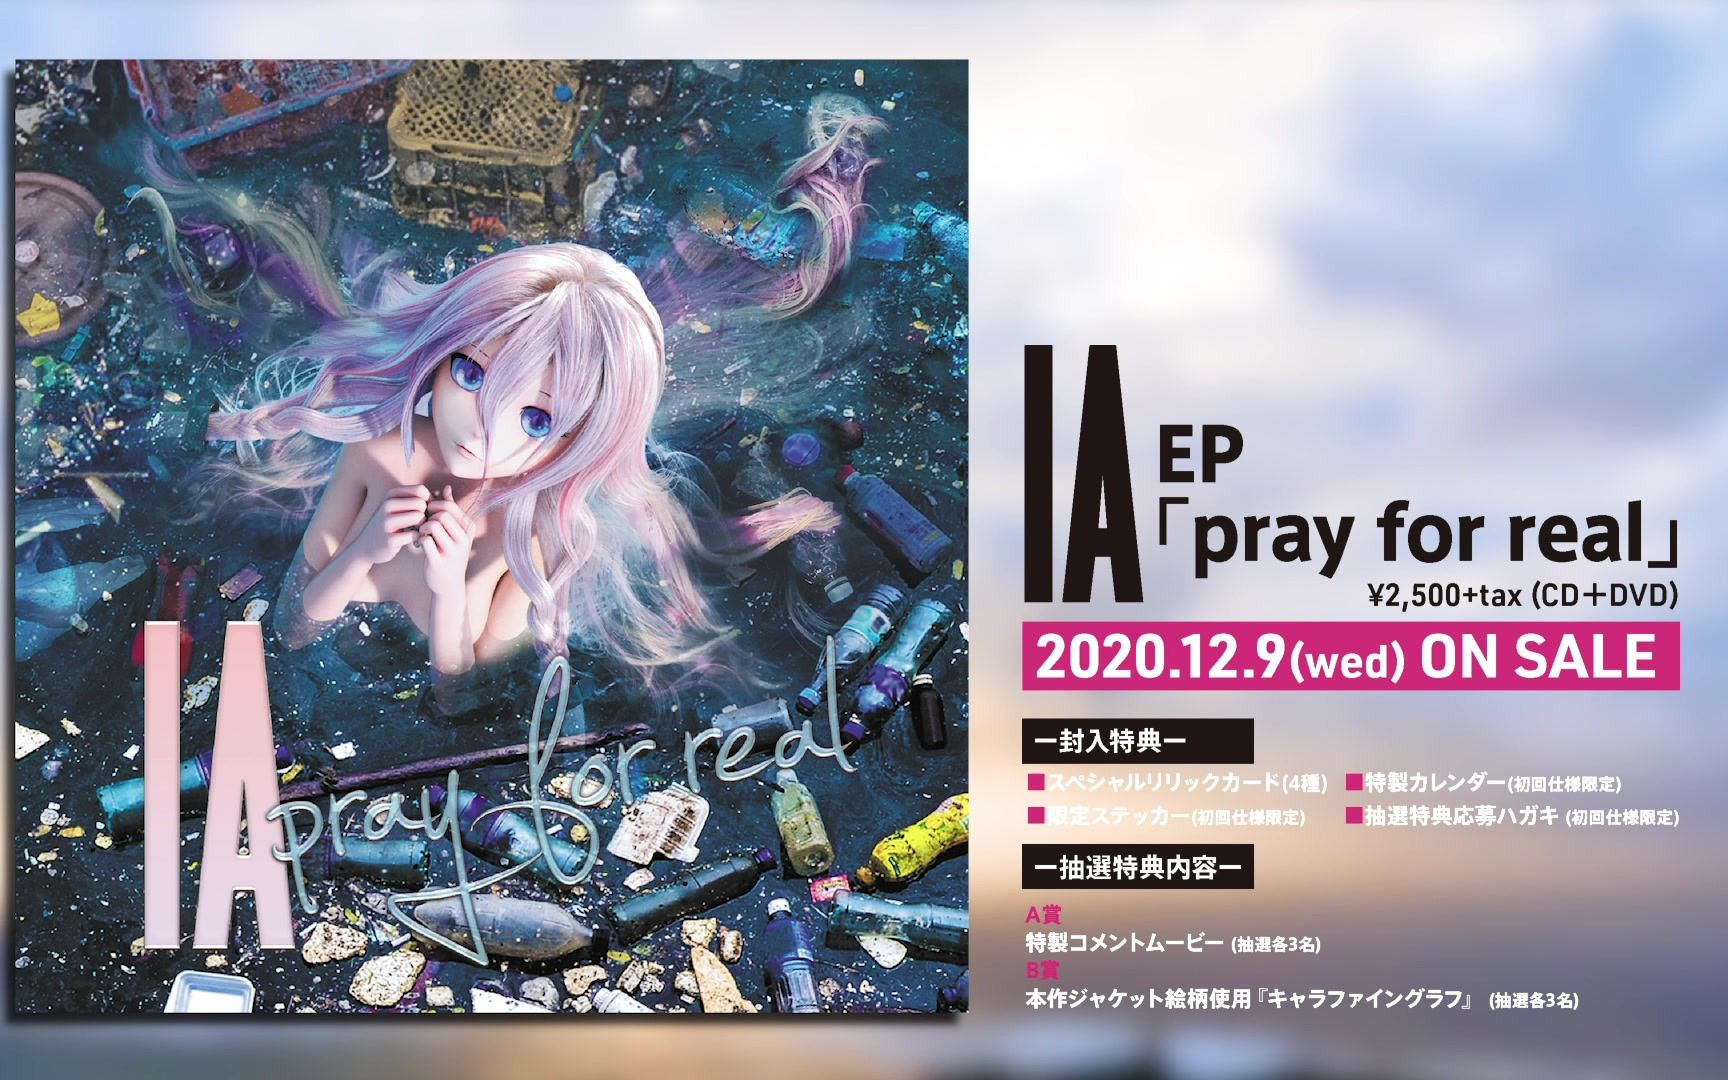 【IA OFFICIAL】pray for real | IA (高清PV)